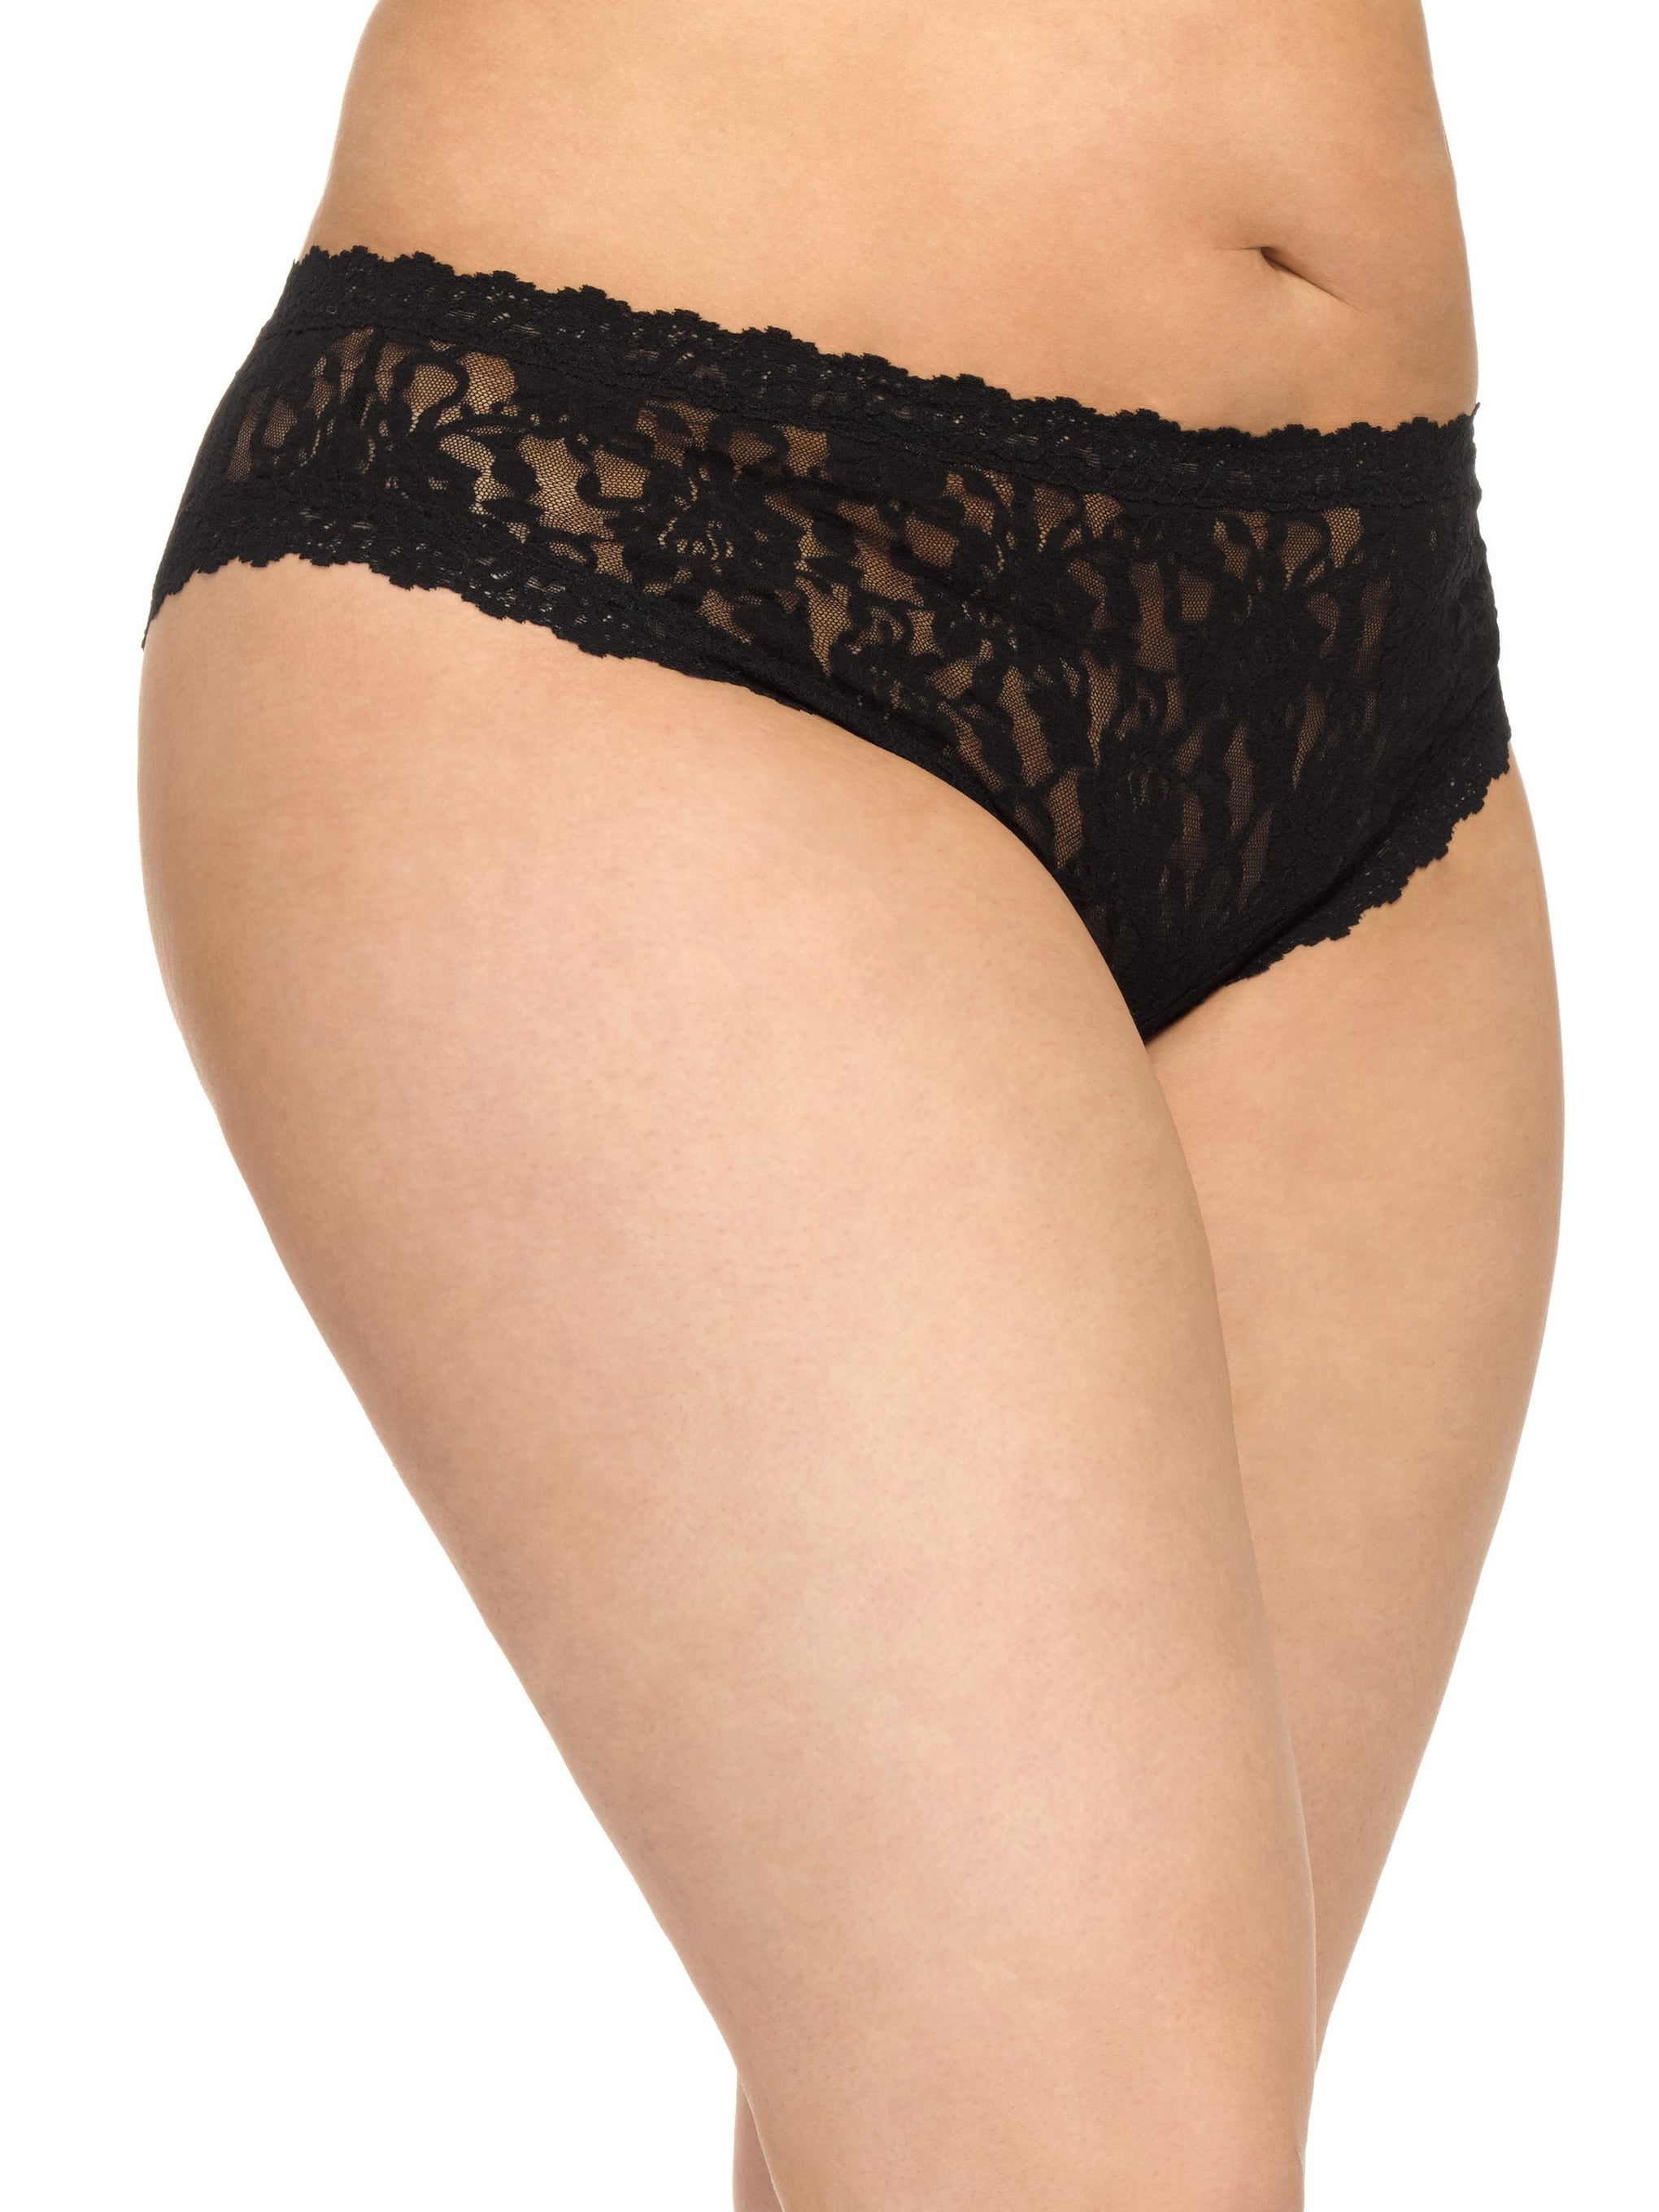 Music Legs Plus size cheeky lace panty with satin bow 10015q-hpink/bk1x/2x